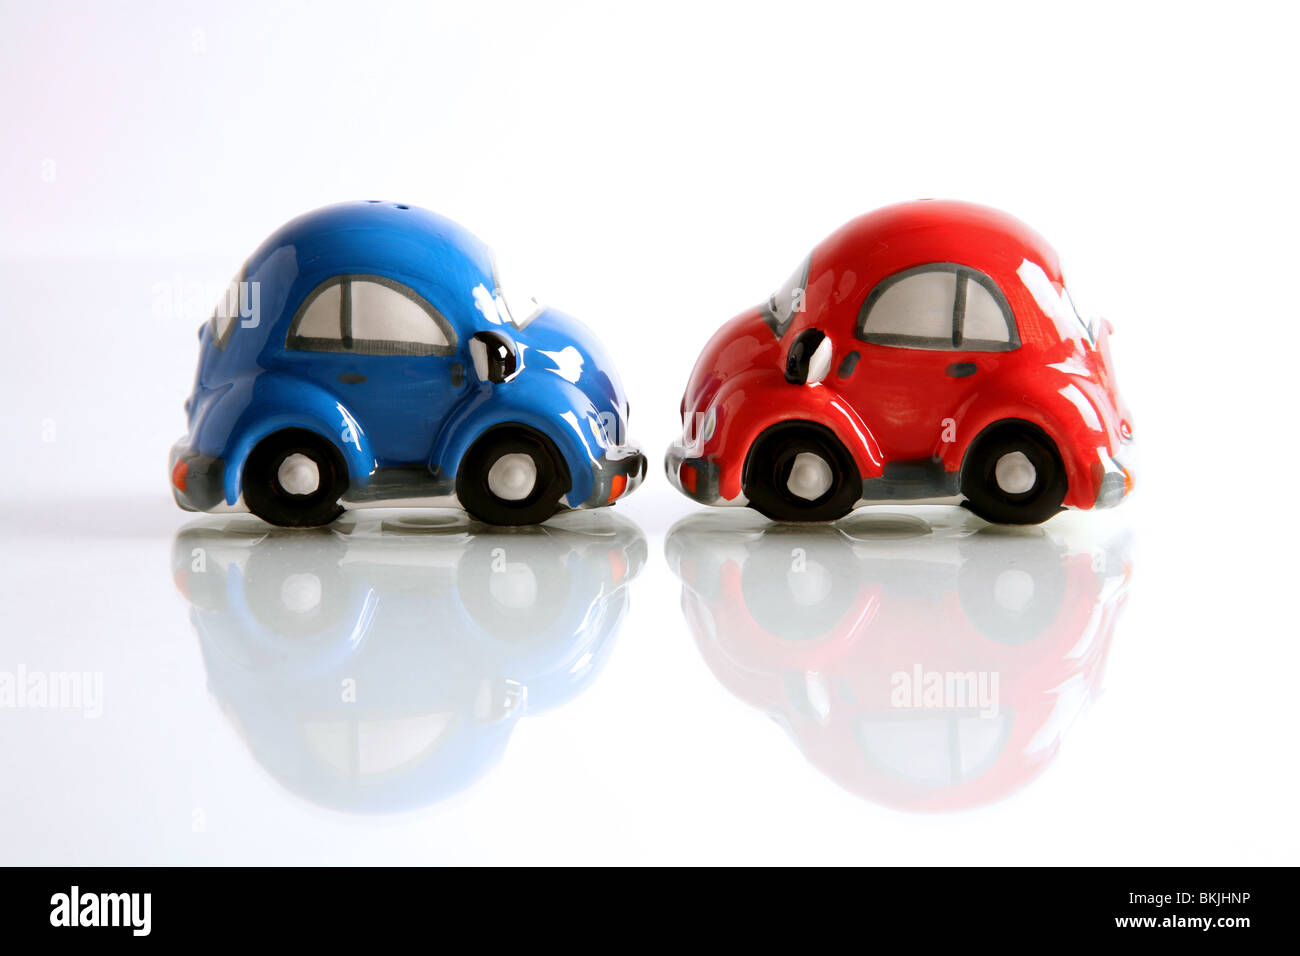 A photograph of a salt and pepper pot shaped as cars, vaguely in the shape of Volkswagen Beetles. Photographed side on. Stock Photo